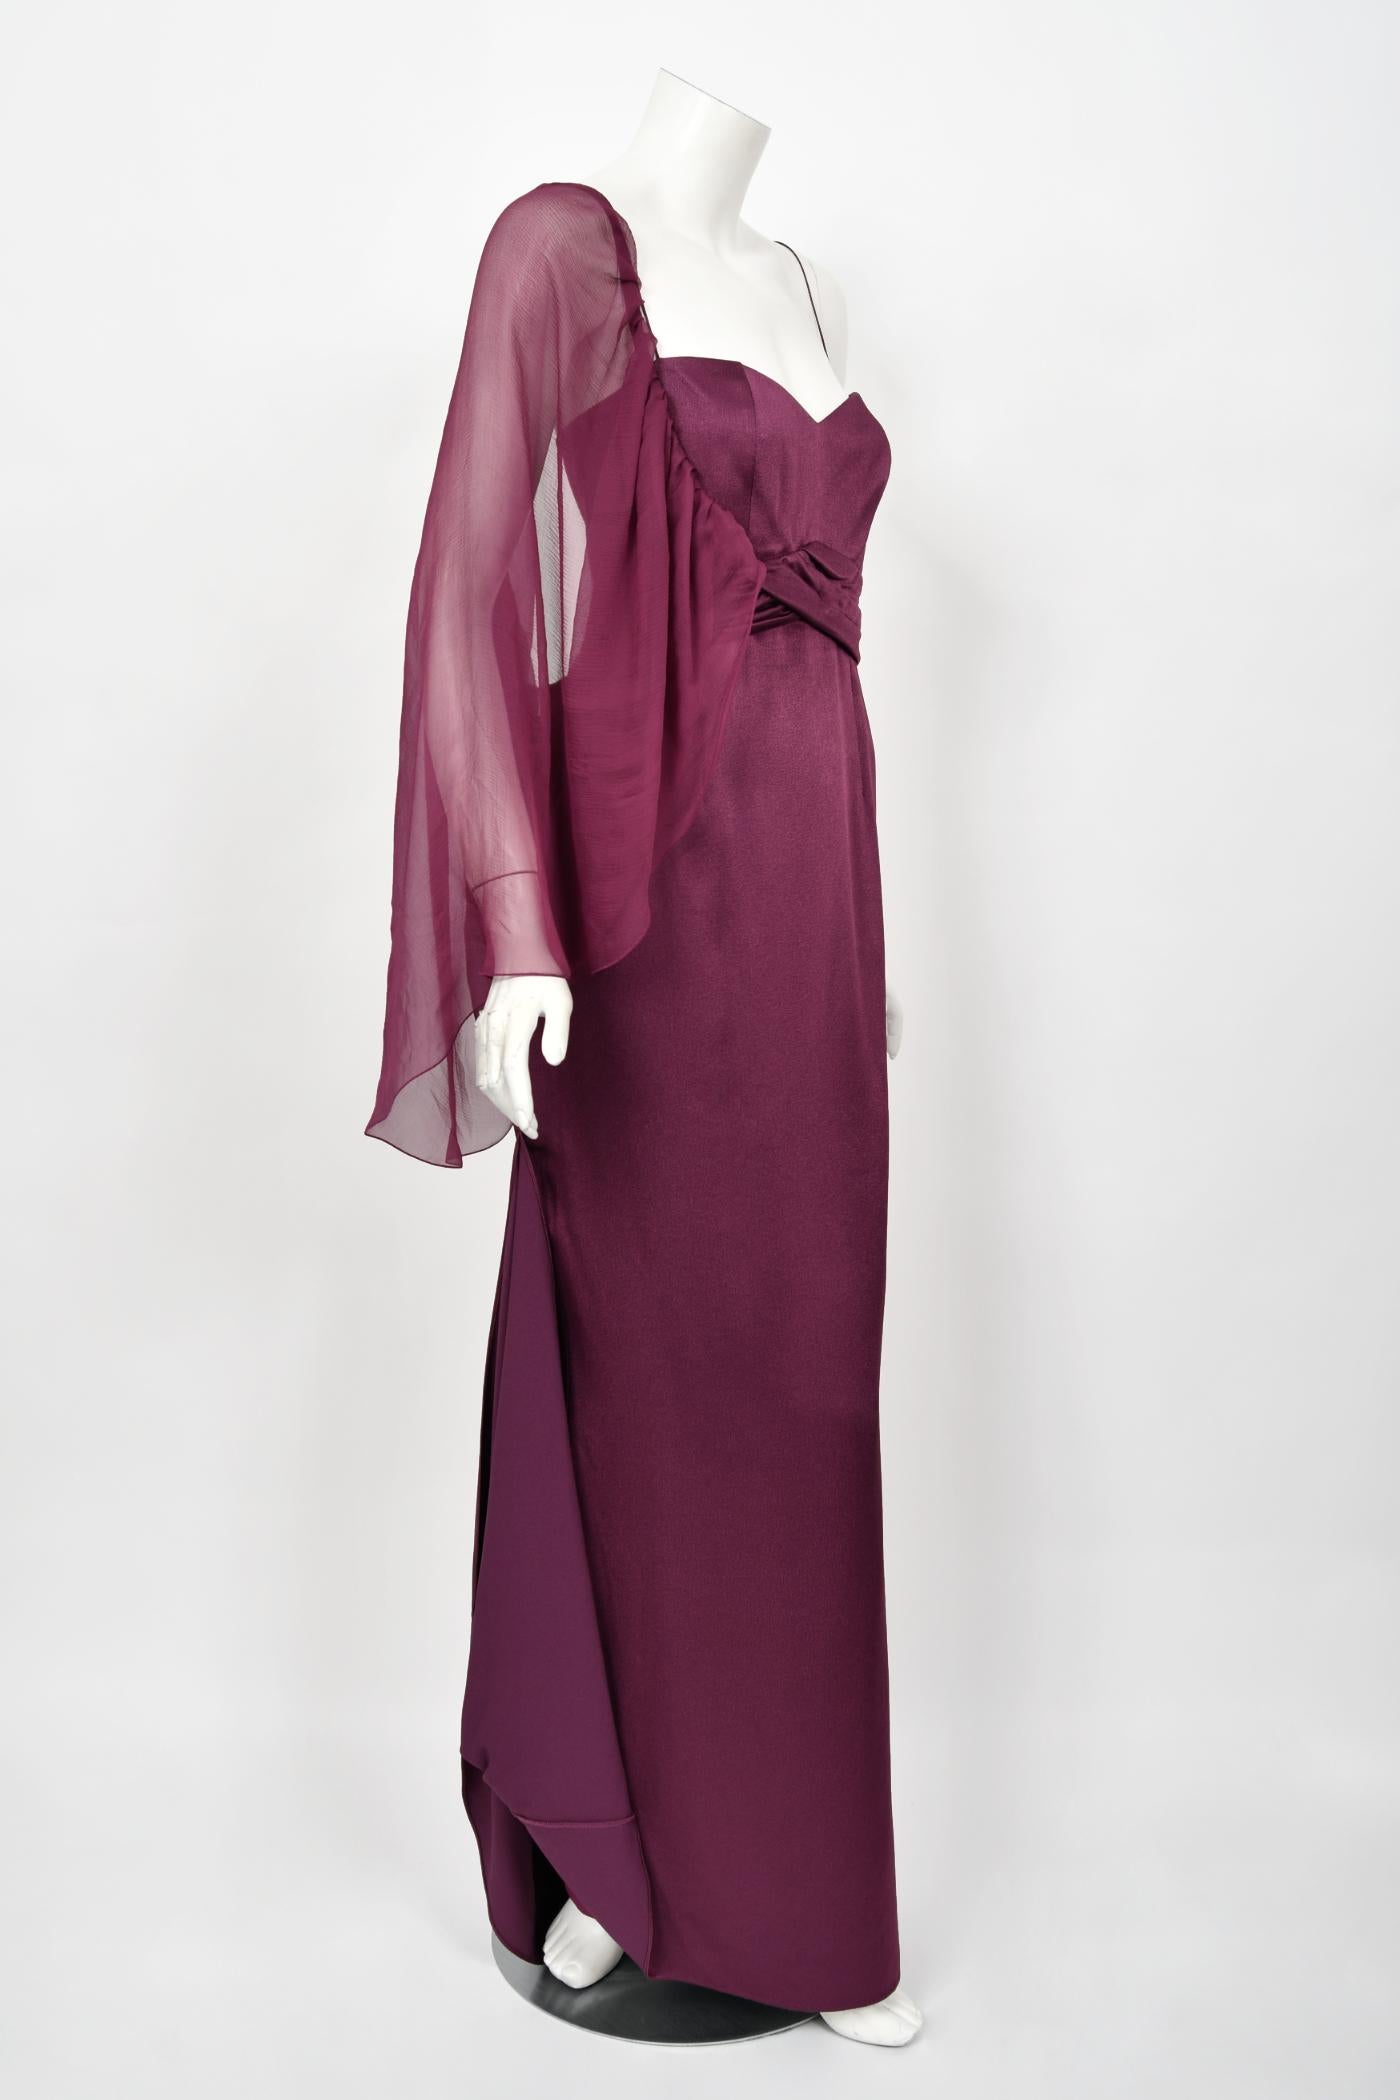 2000 Christian Dior by Galliano Purple Silk Sheer-Sleeve Asymmetric Draped Gown In Good Condition For Sale In Beverly Hills, CA